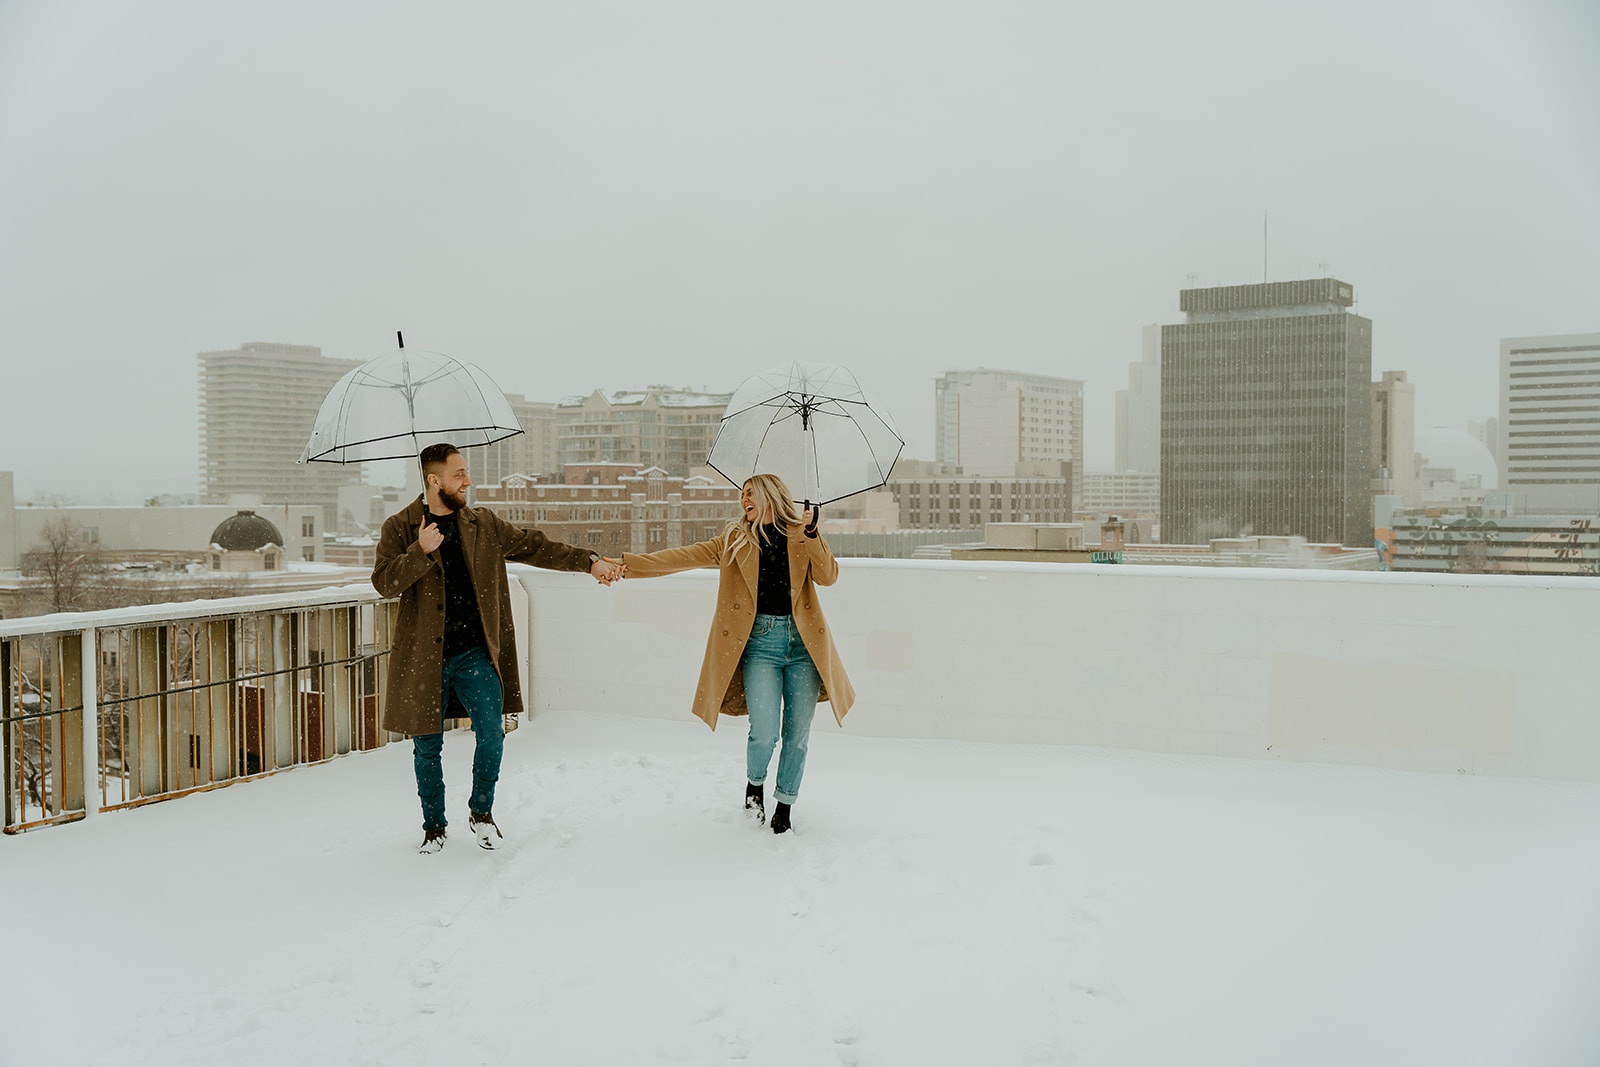 walking alongside downtown reno as the snow fell during their romantic couples session